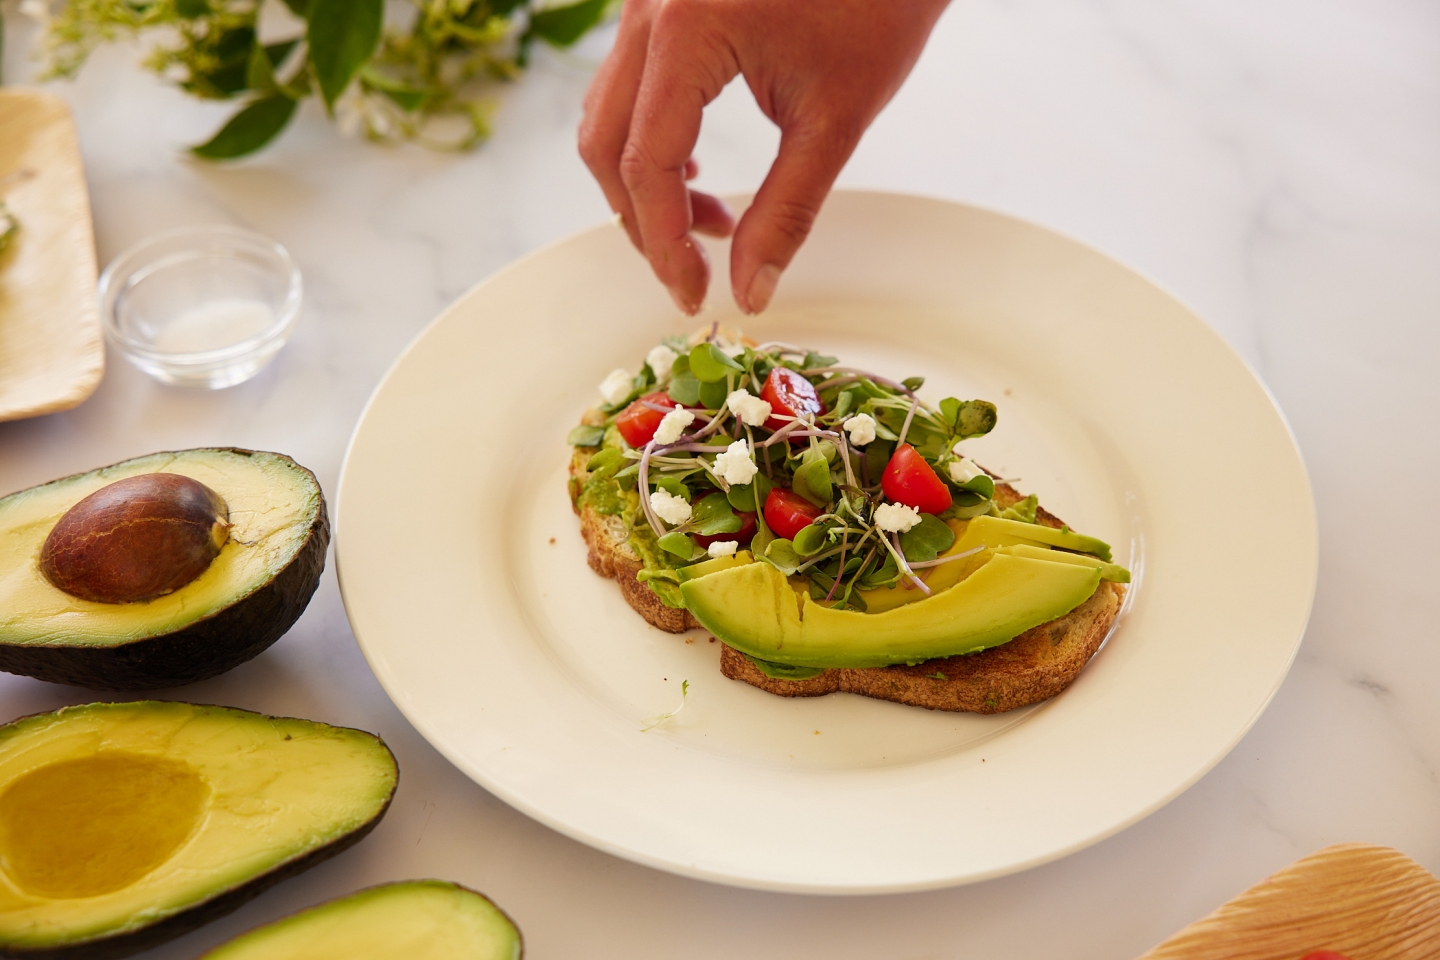 Avocado Toast Toppings That Are Healthy and Delicious for Your Breakfast